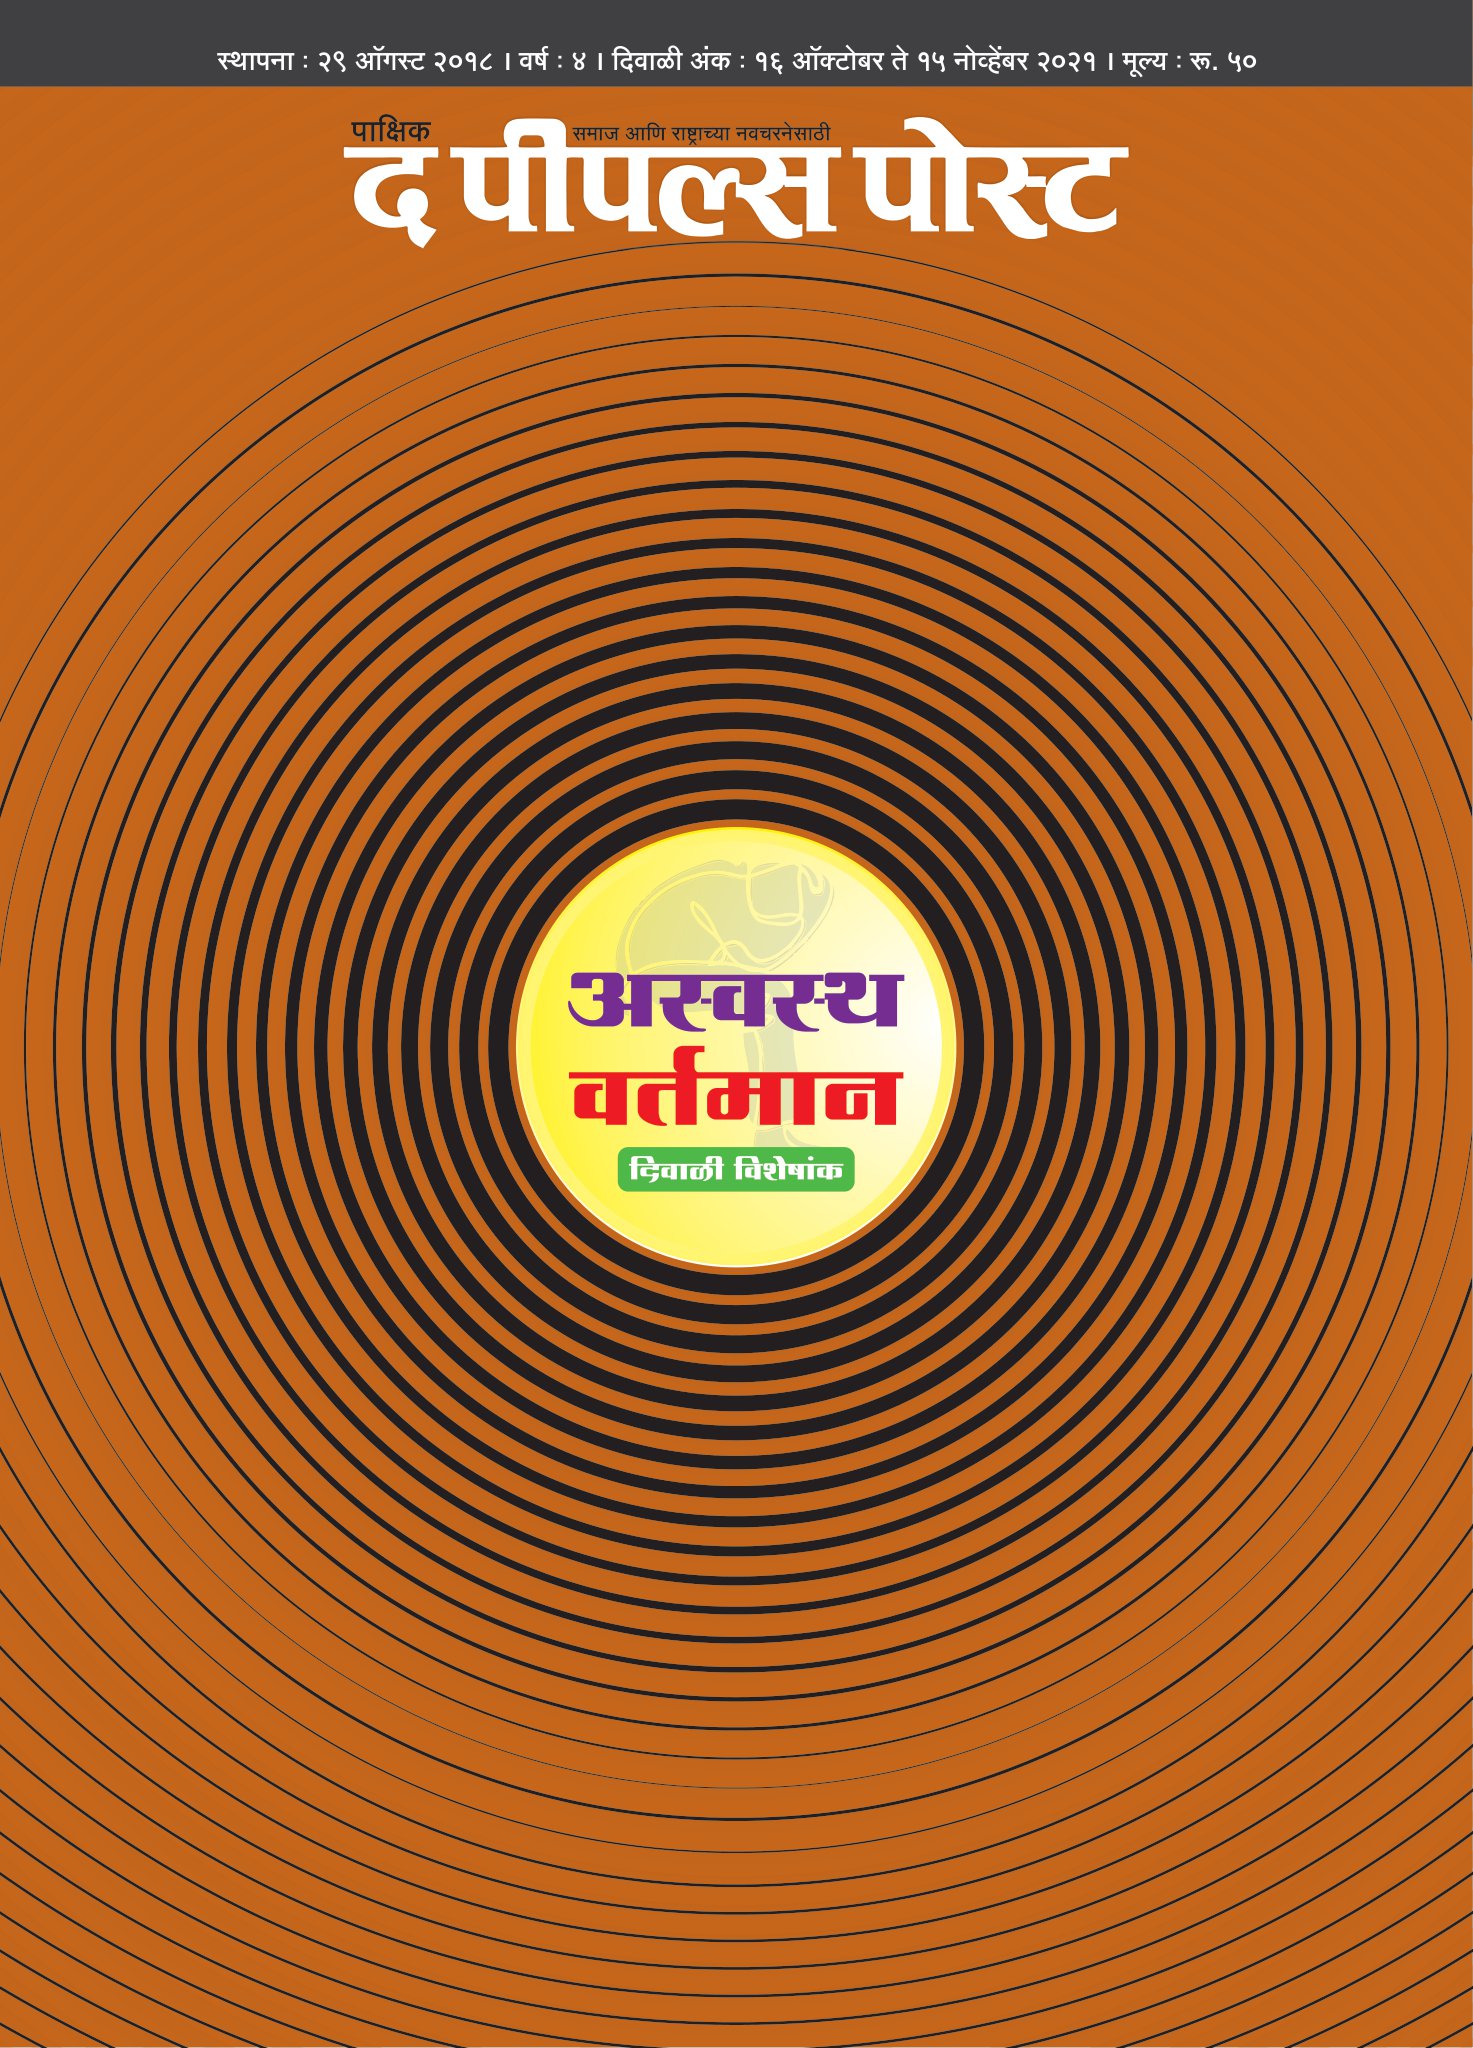 The People’s Post Issued 16 October 2021 – 15 November 2021 Diwali issue